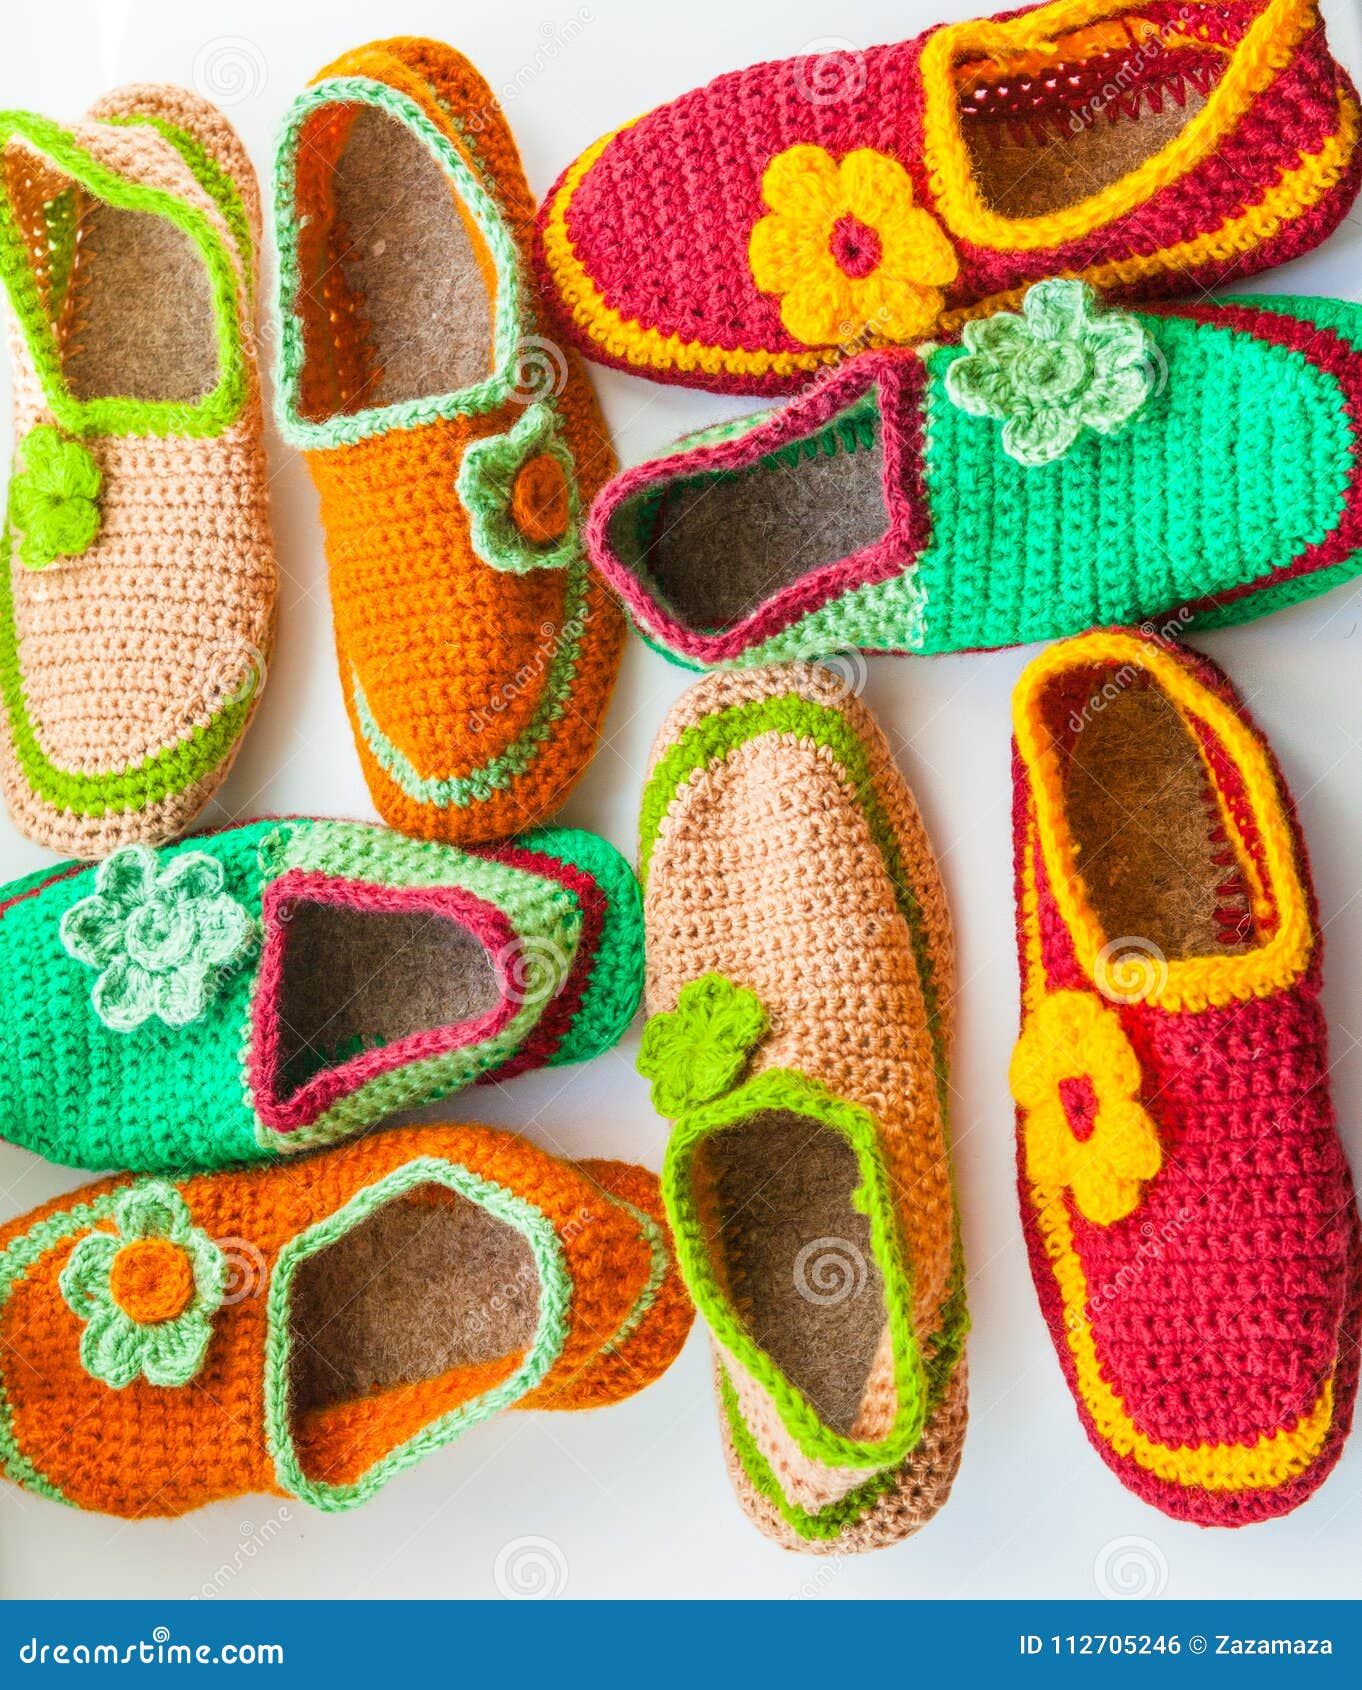 The and Colorful Knitted Homemade Slippers. Stock Photo - Image of knit, woolen: